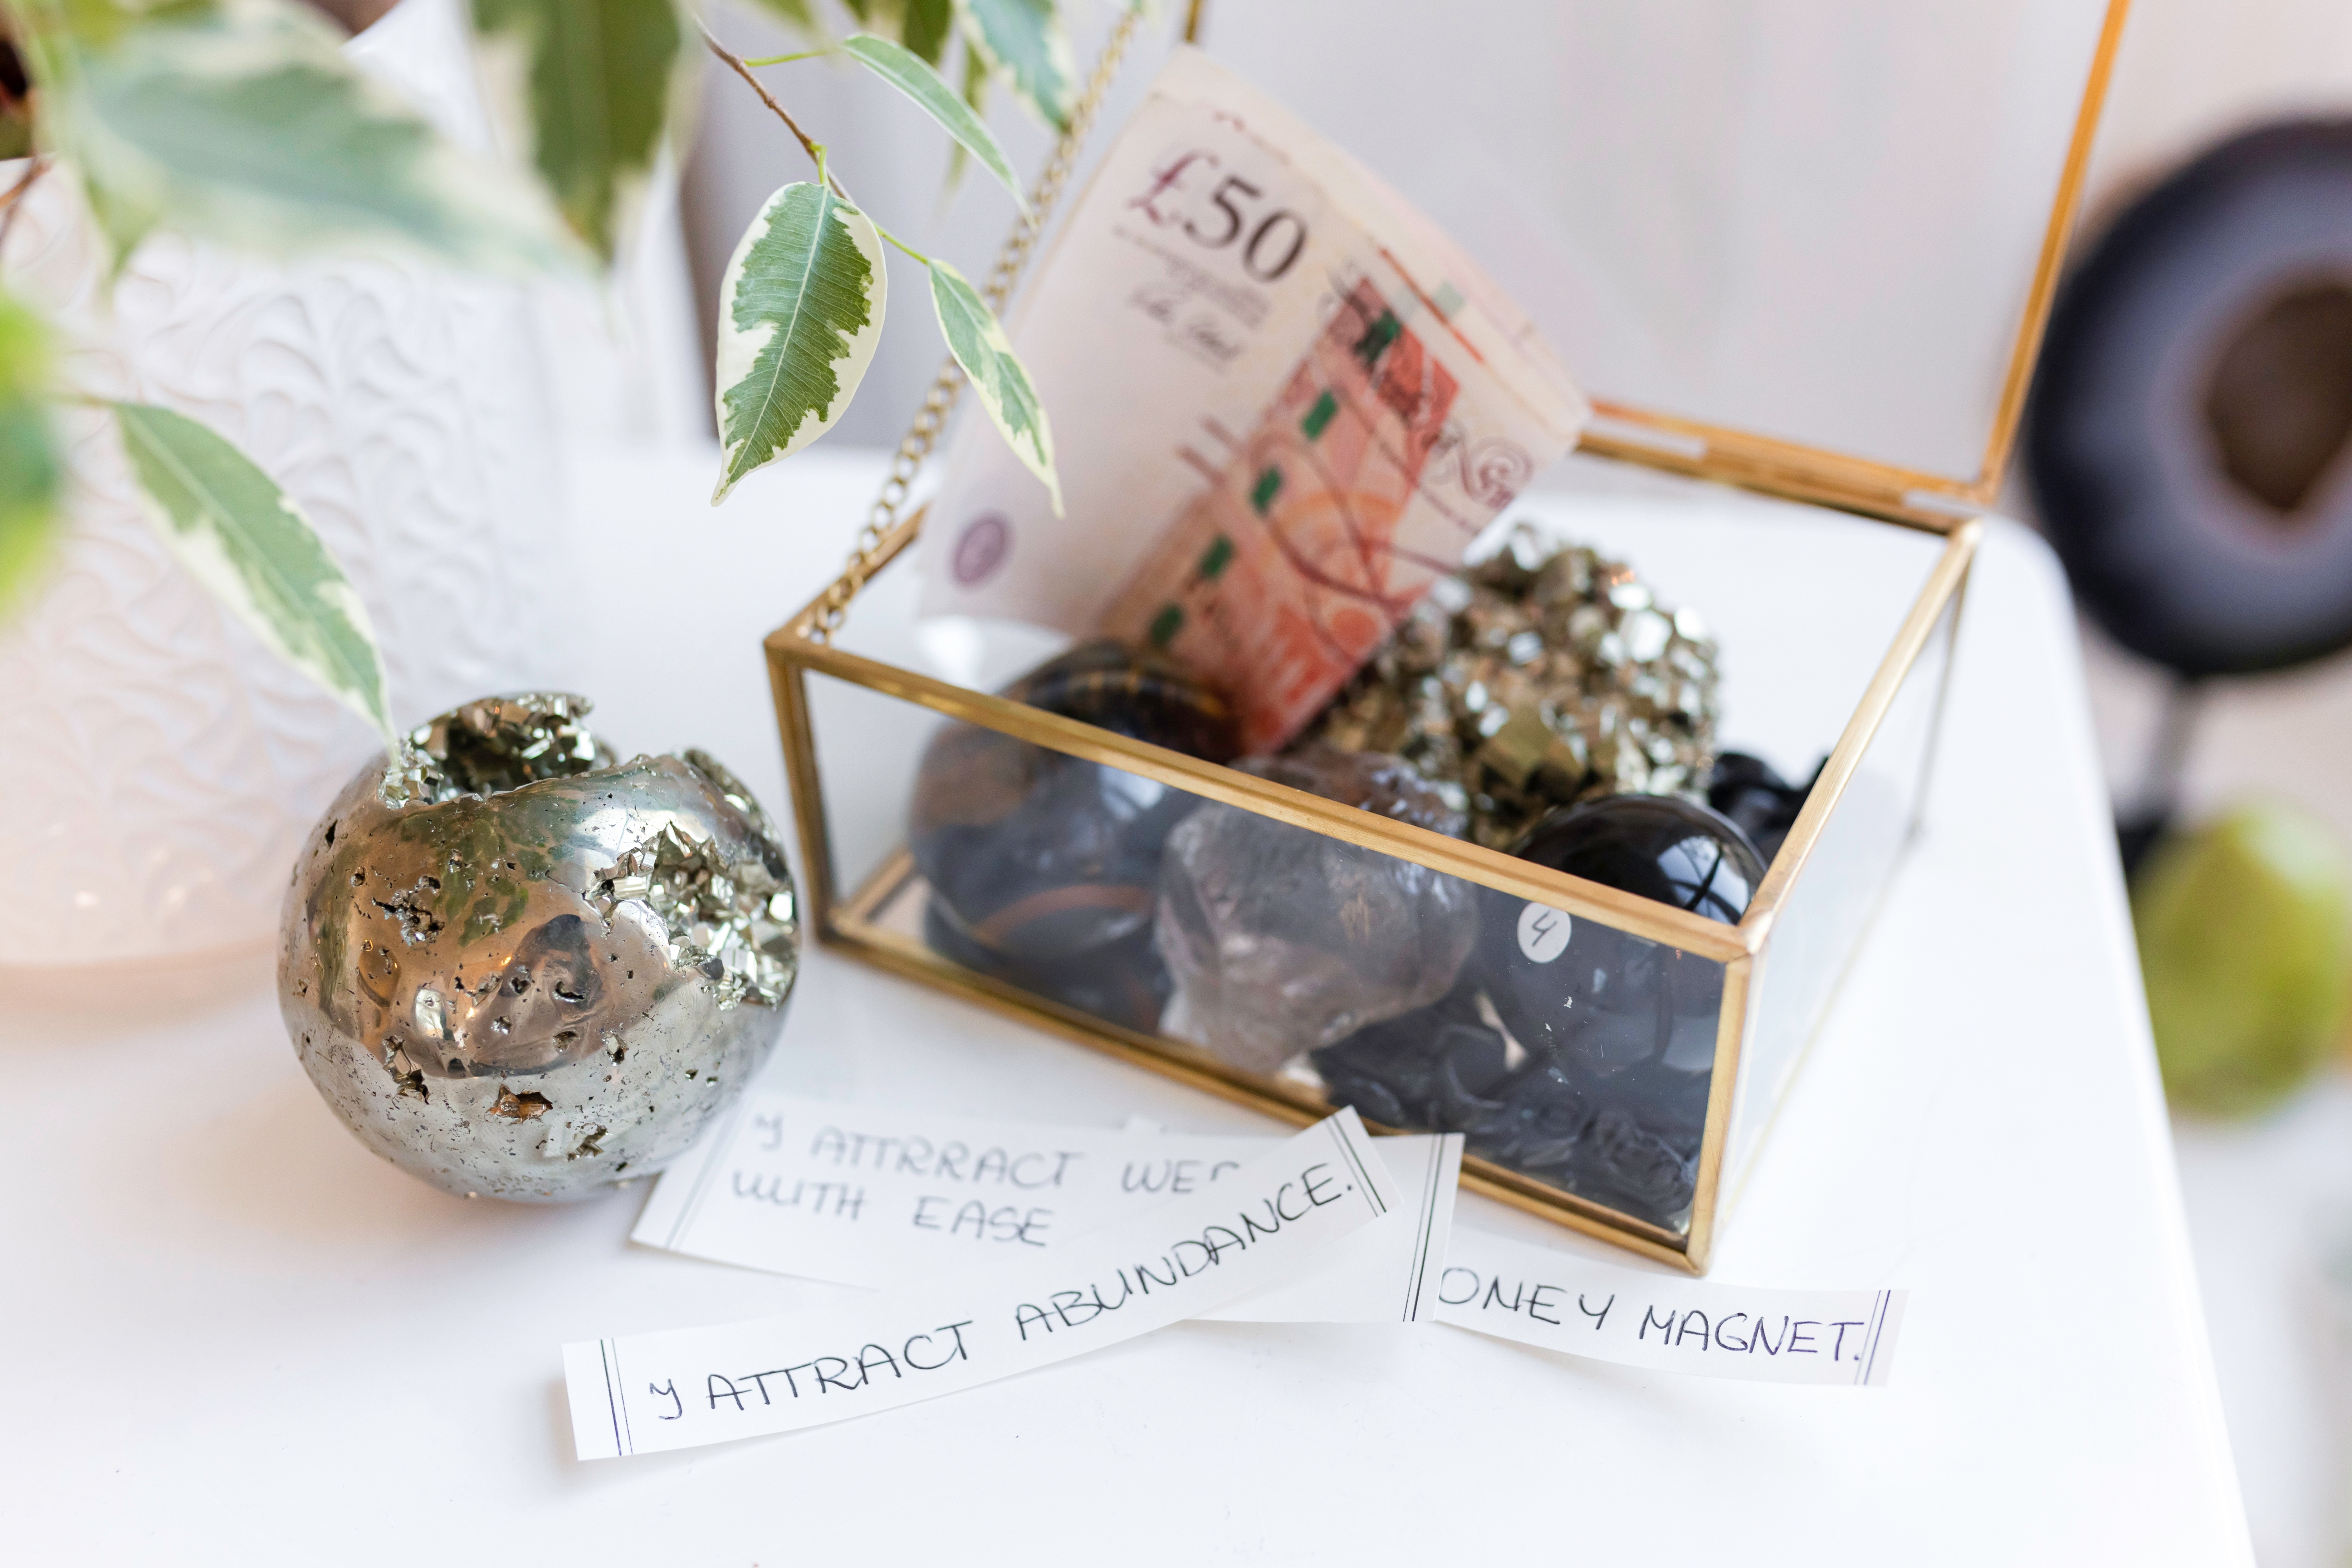 A box of crystals, with a £50 note, and some notes with writing on; two of the notes are partially obstructed but one says 'I Attract Abundance'.